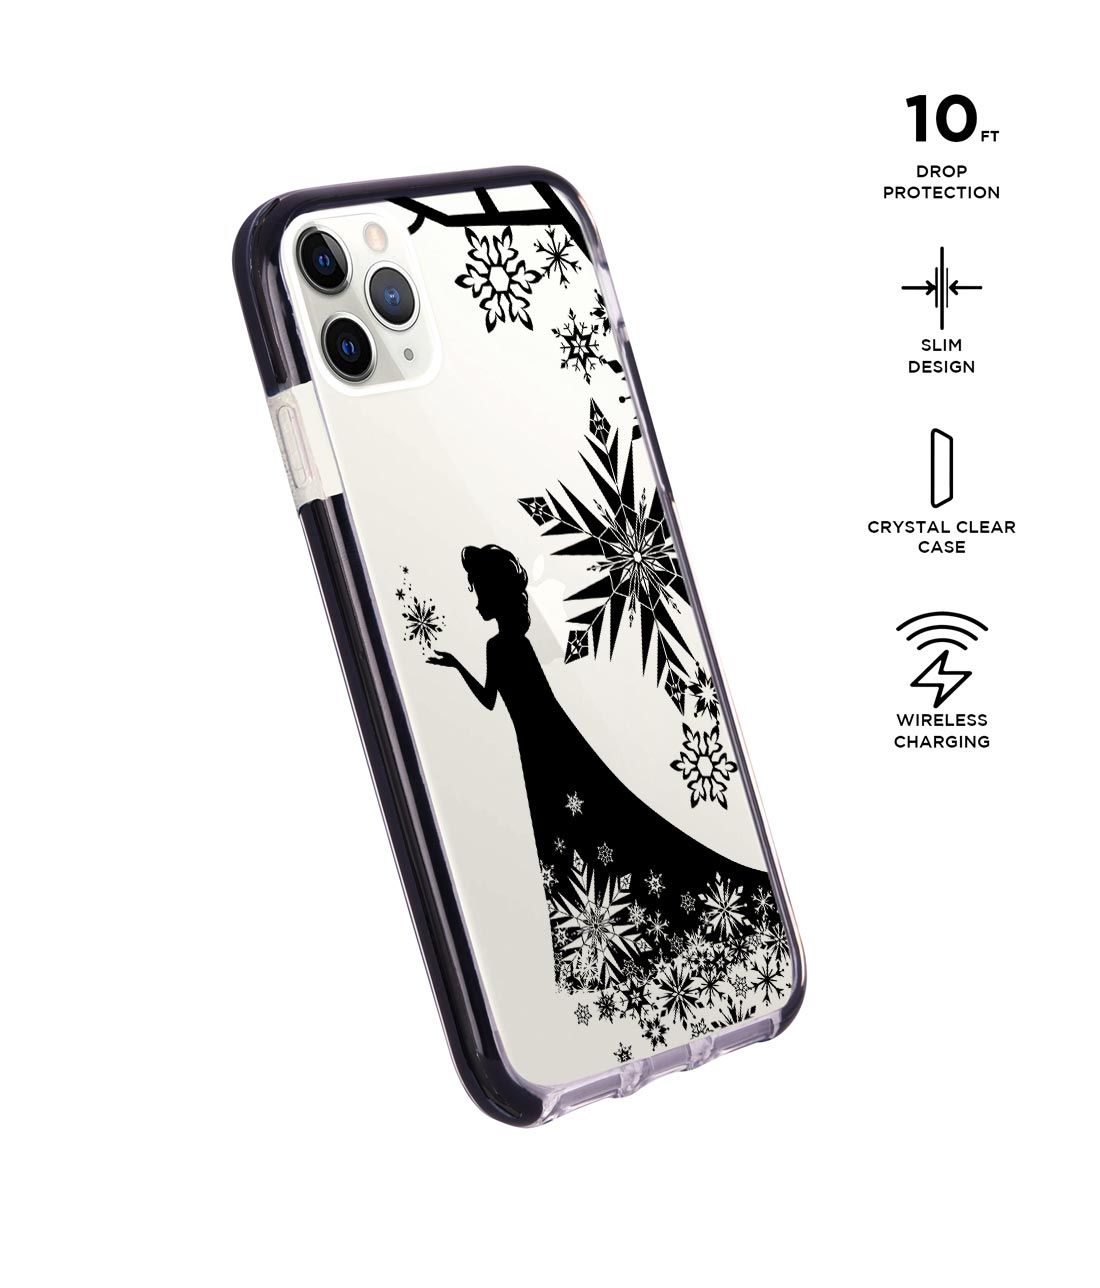 Elsa Silhouette - Extreme Phone Case for iPhone 11 Pro